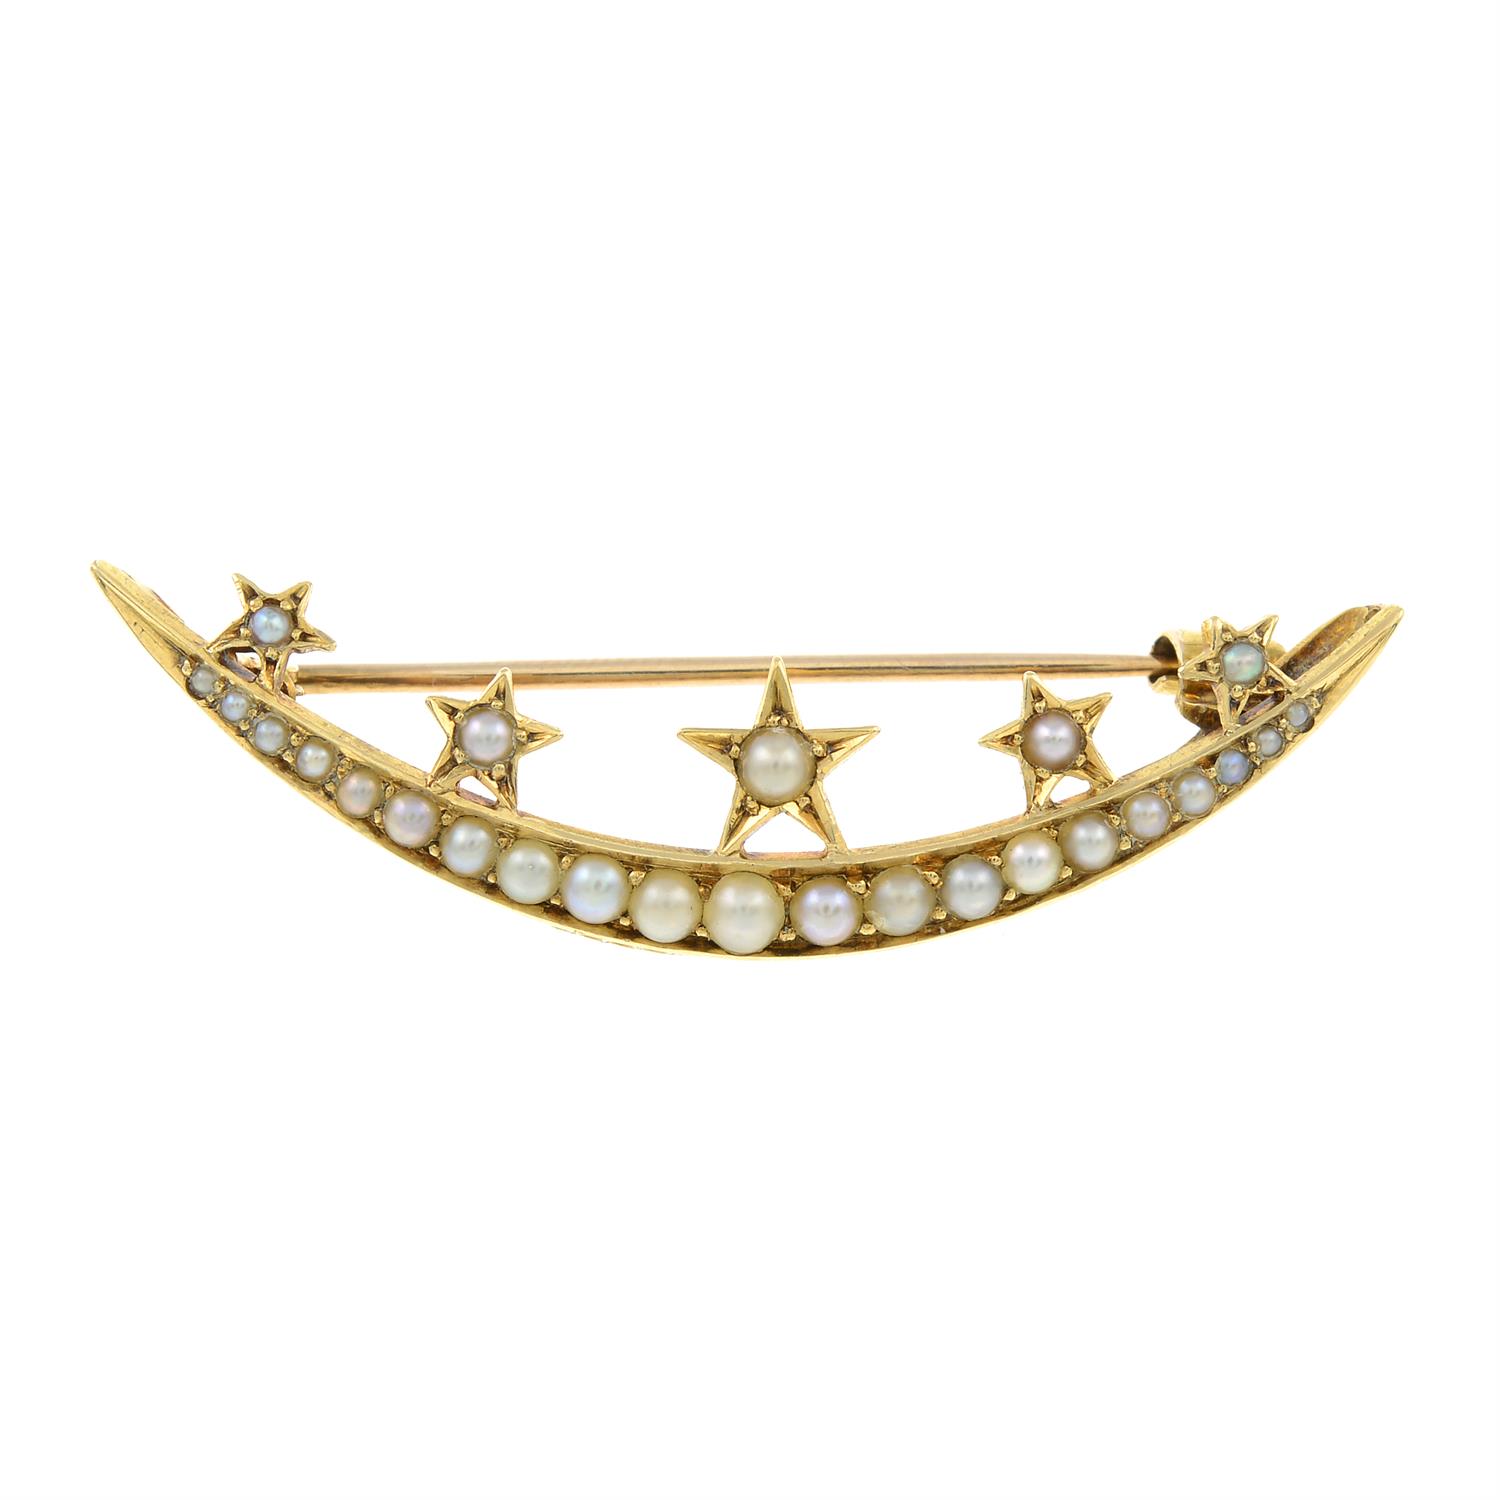 An early 20th century gold split pearl crescent and stars brooch. - Image 3 of 4